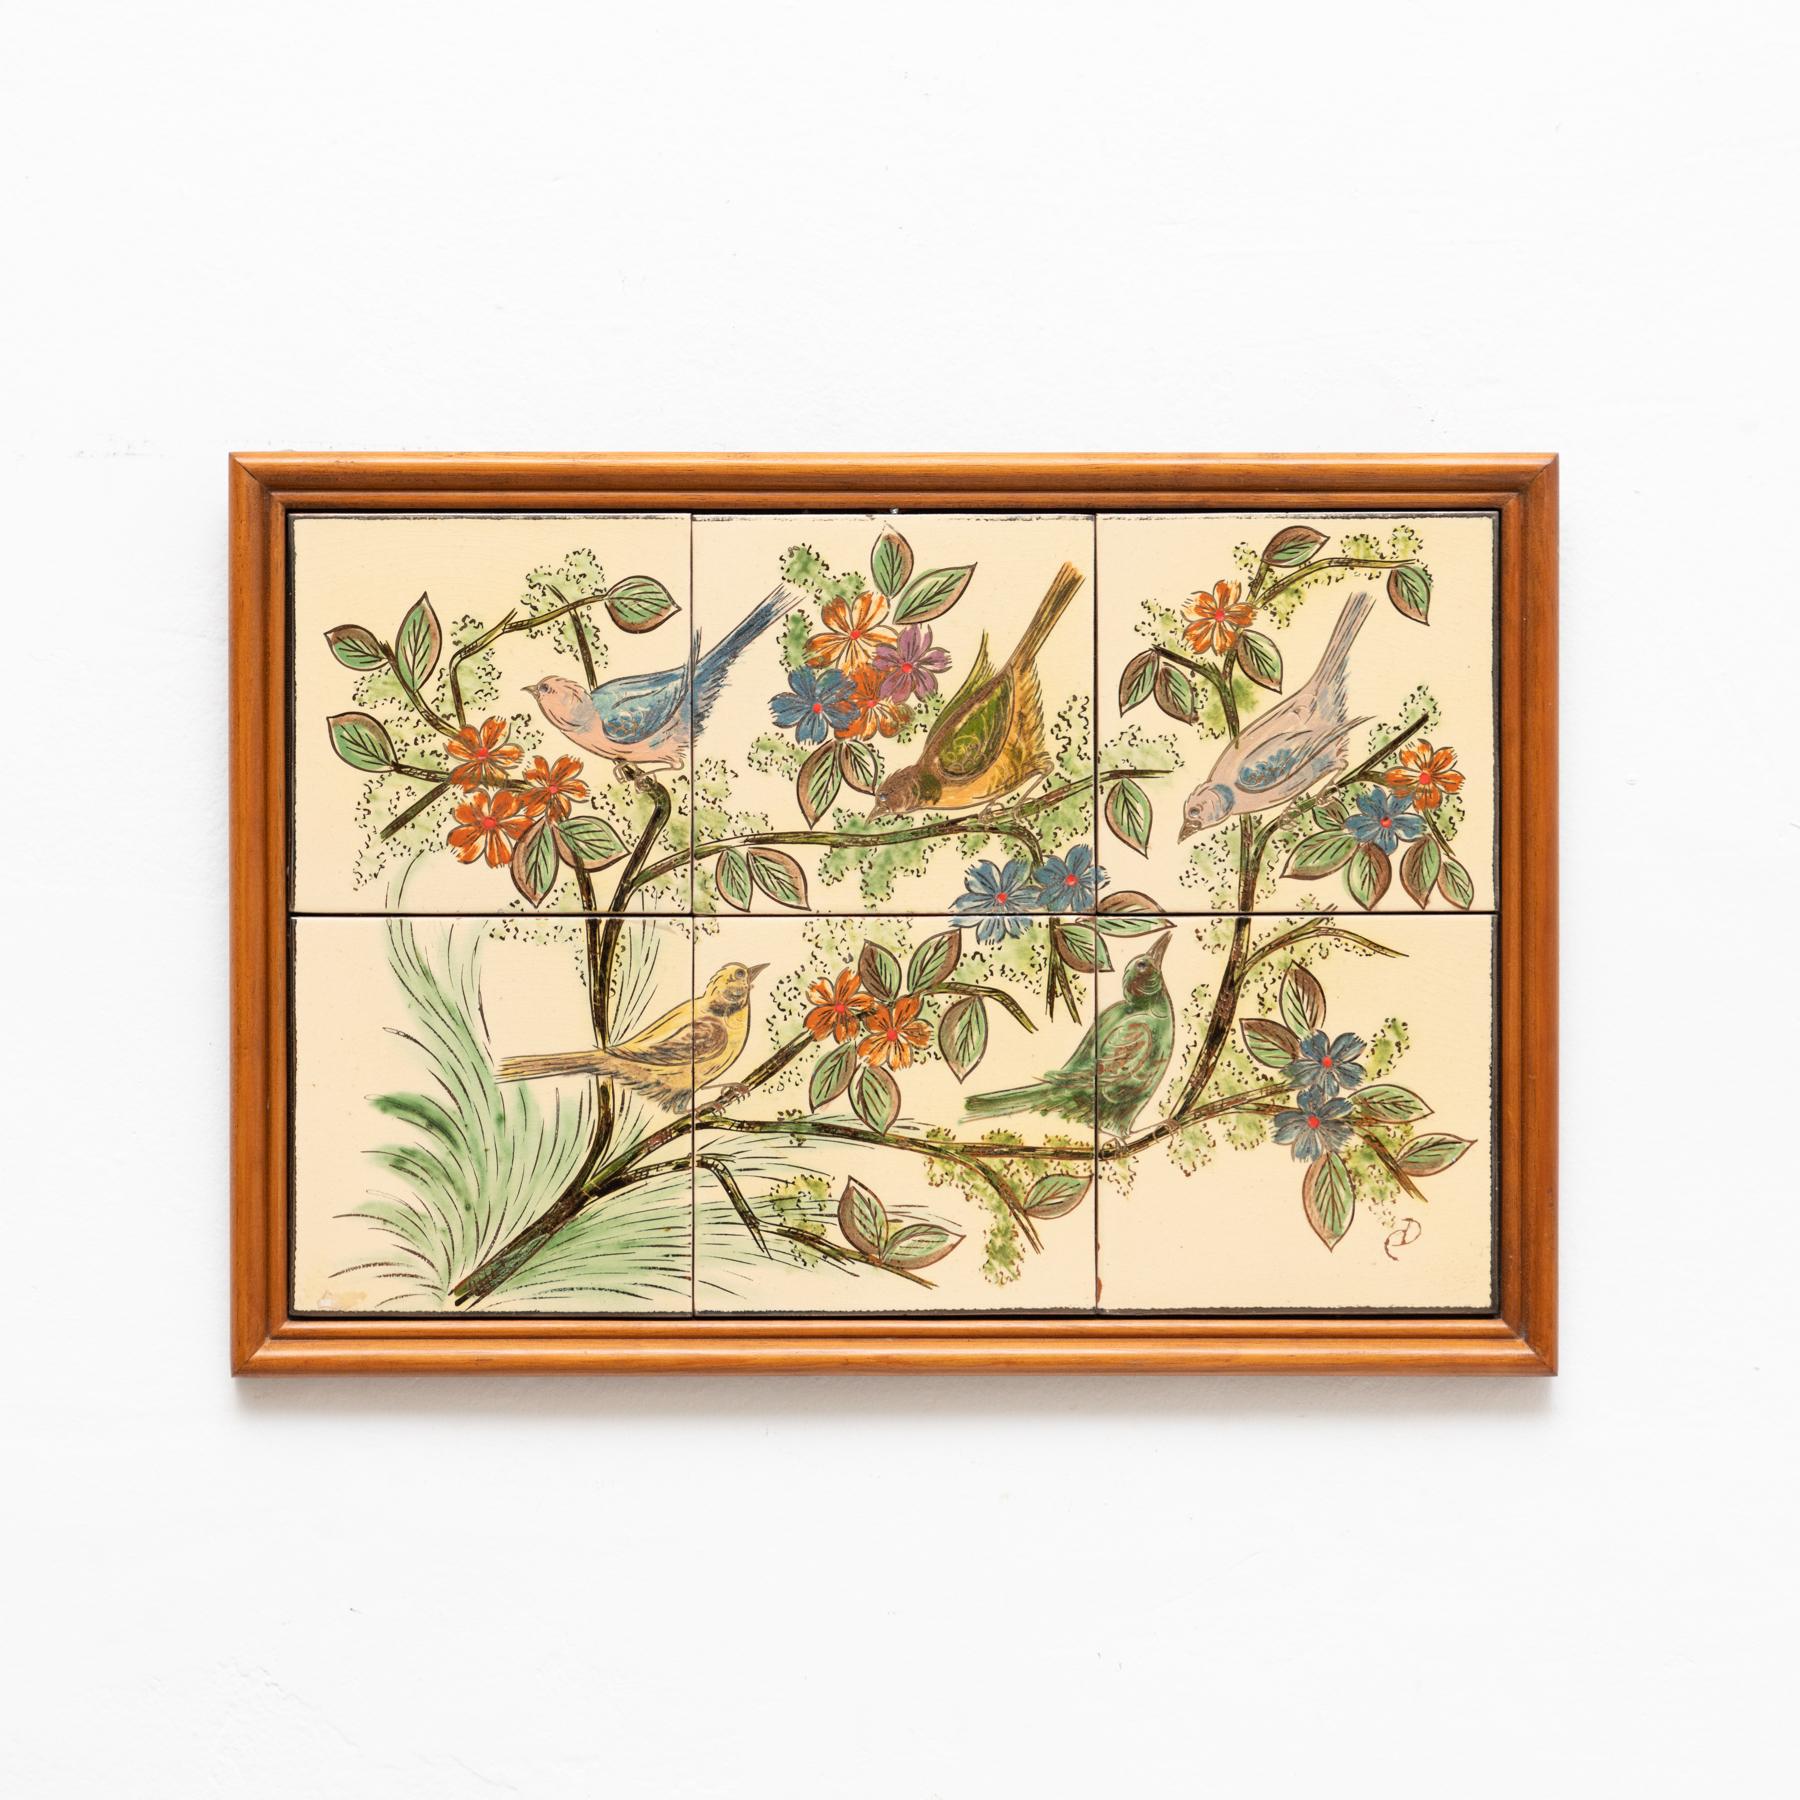 Ceramic hand painted artwork of five birds by Catalan artist Diaz Costa, circa 1960.
Framed. Signed.

In original condition, with minor wear consistent of age and use, preserving a beautiul patina.